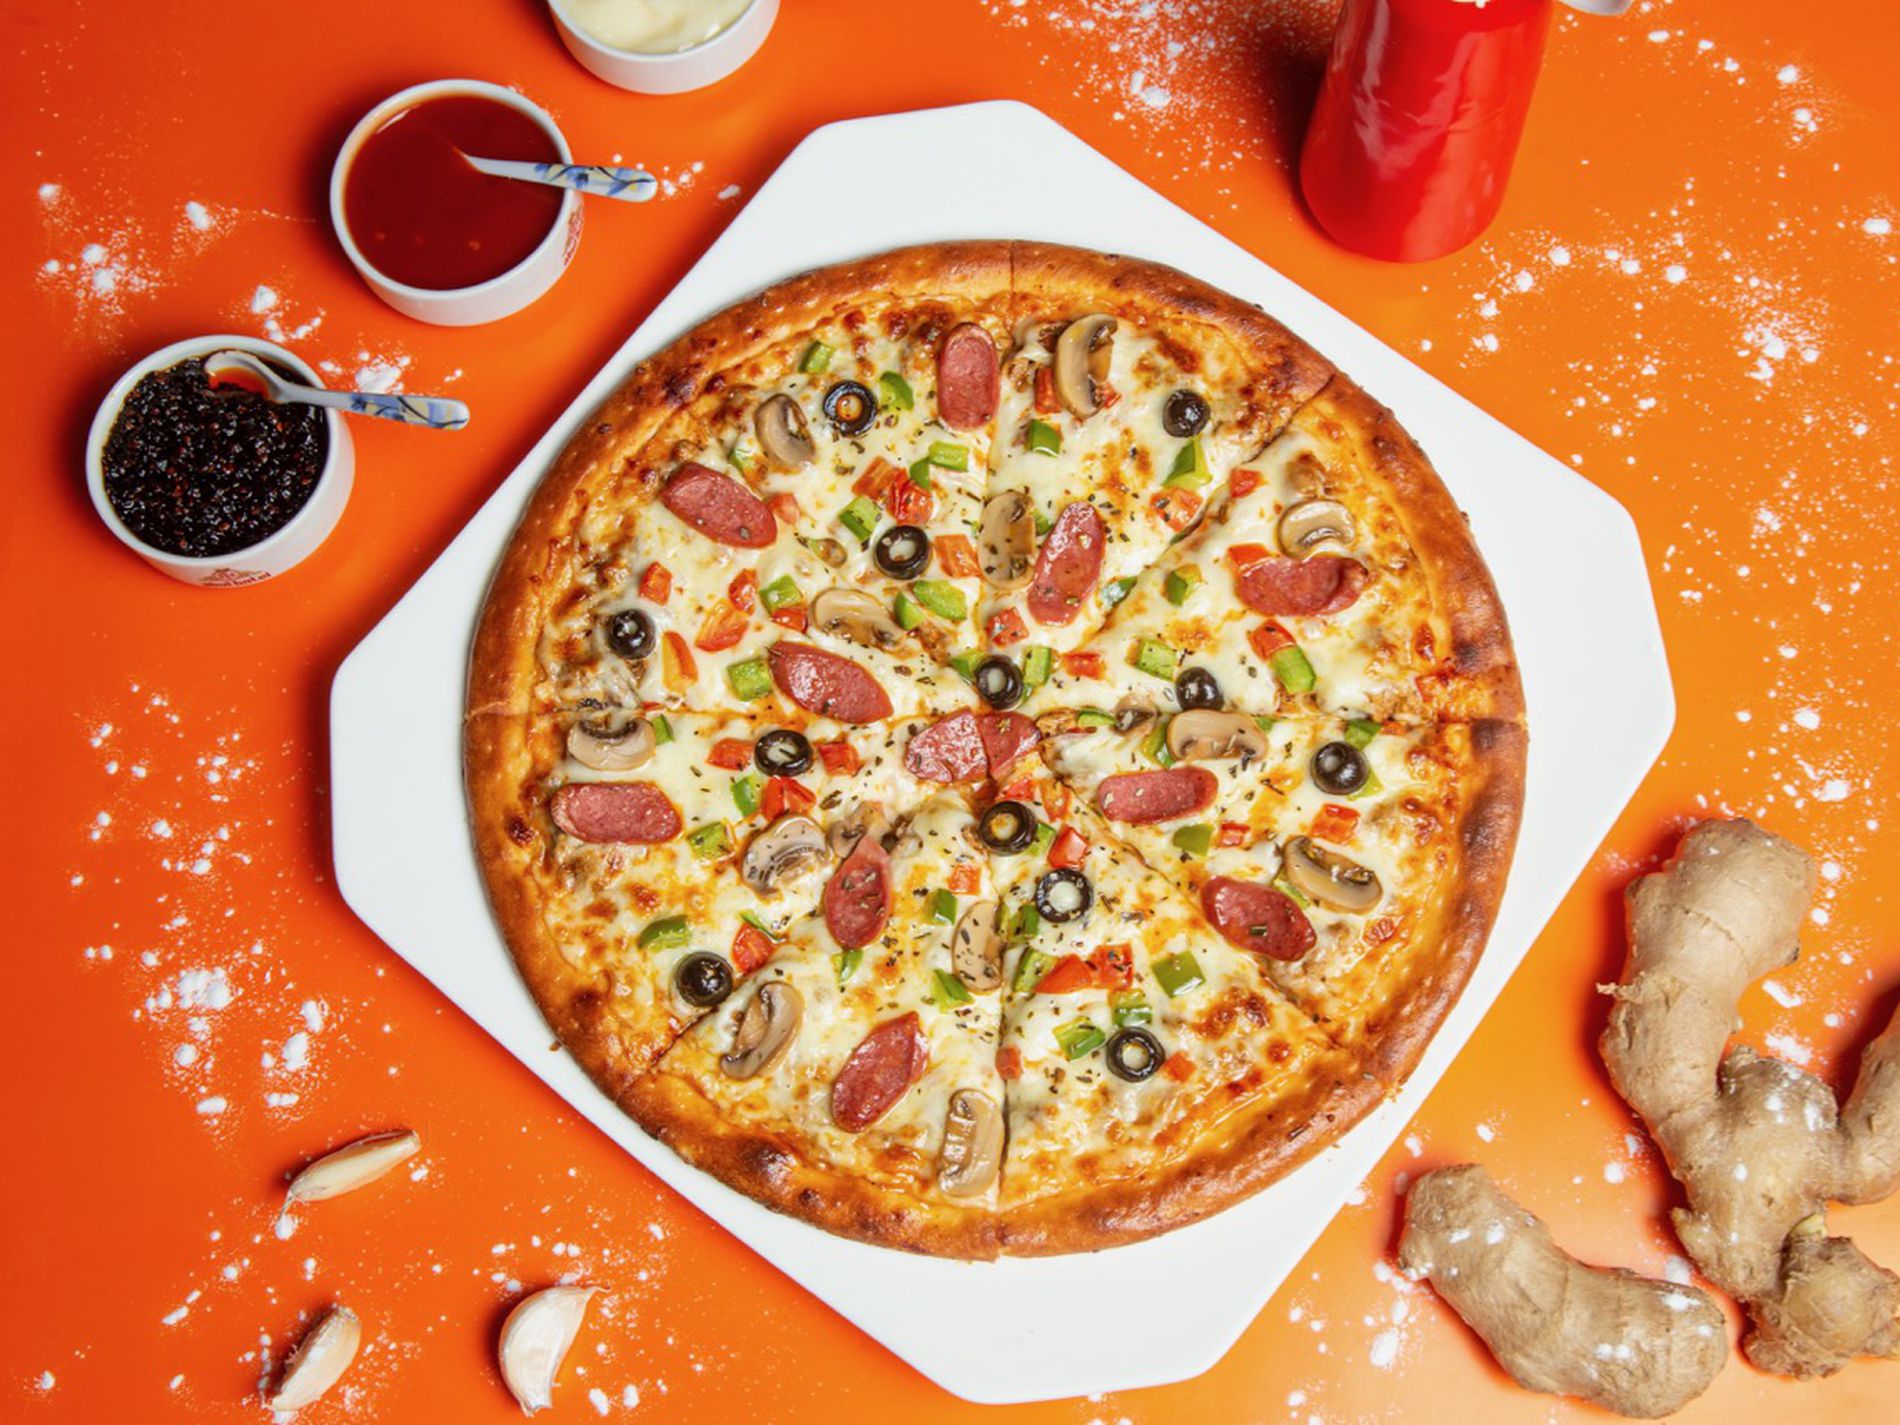 Pizza Takeaway Business with Excellent Location